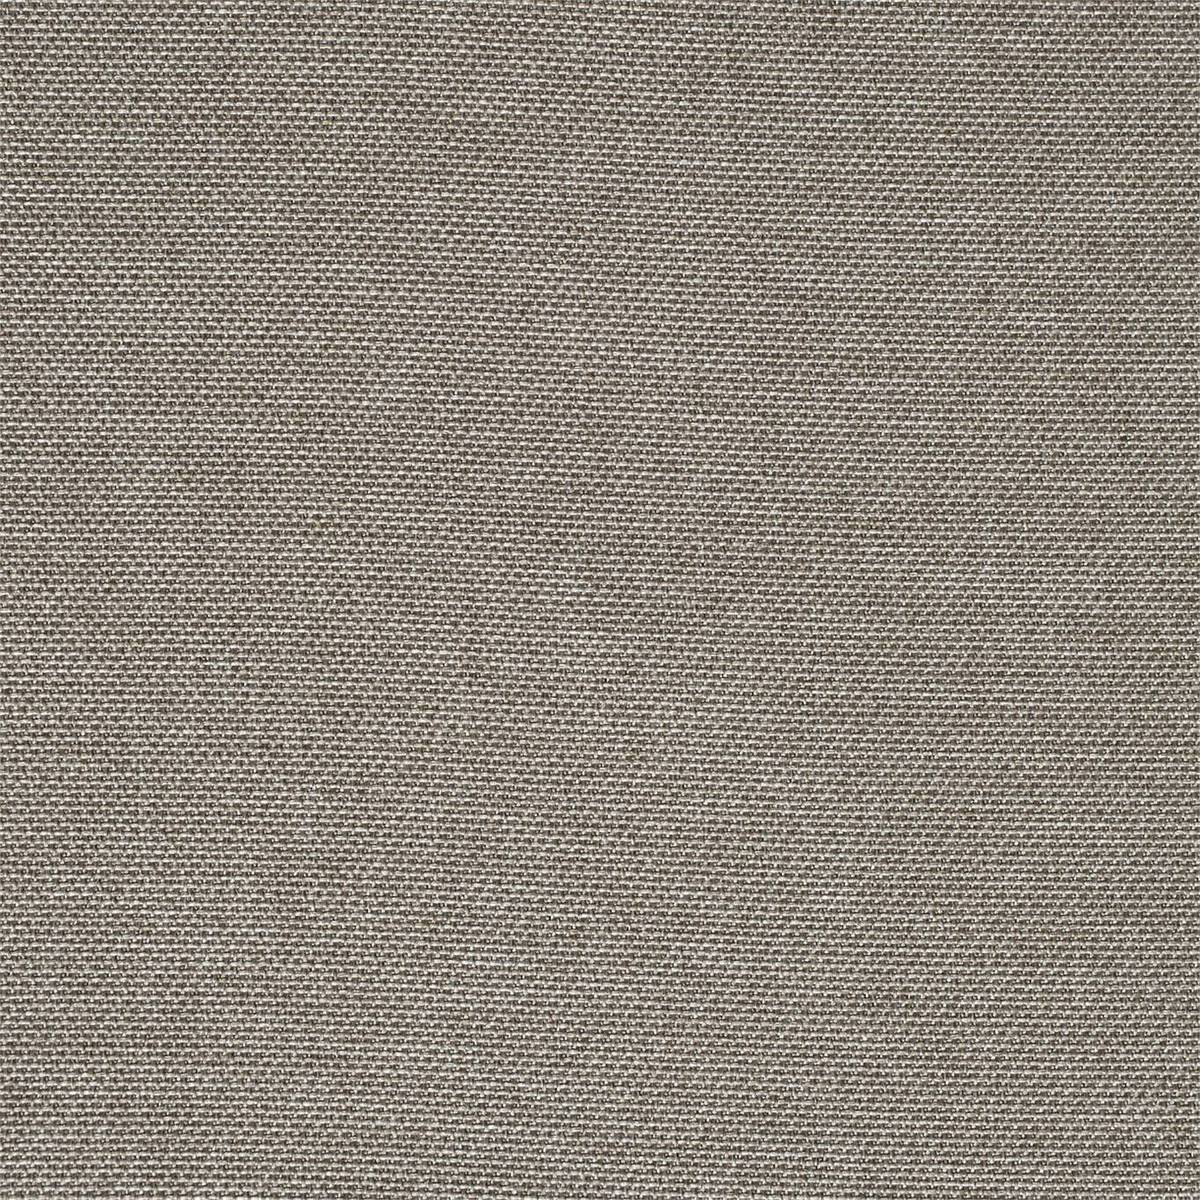 Maison Plume Fabric by Harlequin